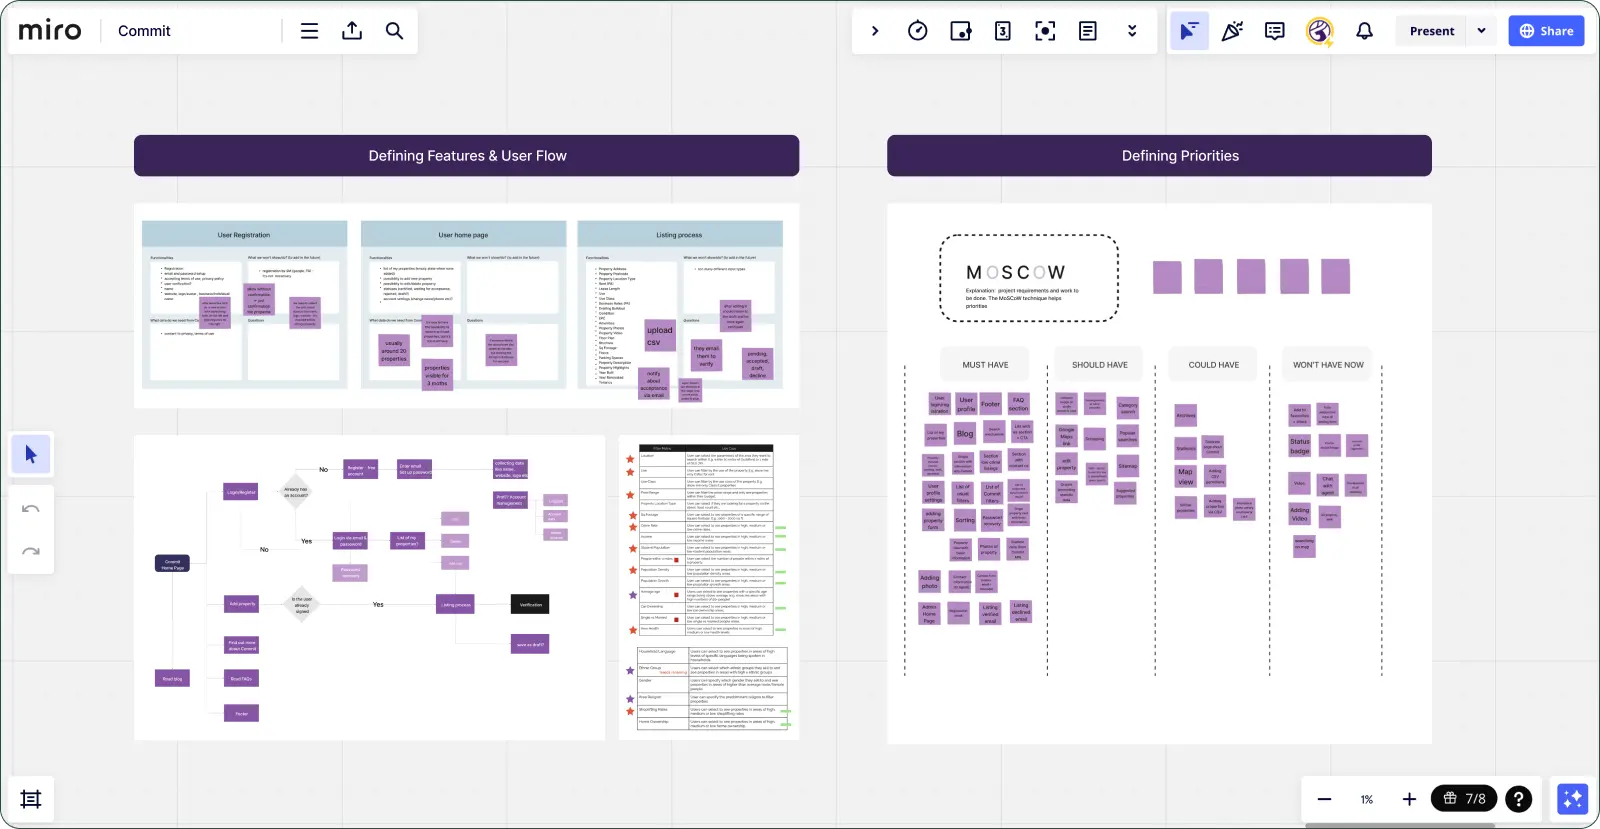 A screenshot of a Miro board displaying two main sections: 'Defining Features & User Flow' and 'Defining Priorities'. On the left, there are flowcharts and notes detailing user registration, home page features, and the listing process. The right side showcases a 'MOSCOW' prioritization chart, categorizing features into 'Must Have', 'Should Have', 'Could Have', and 'Won't Have Now' columns, each populated with various task cards.